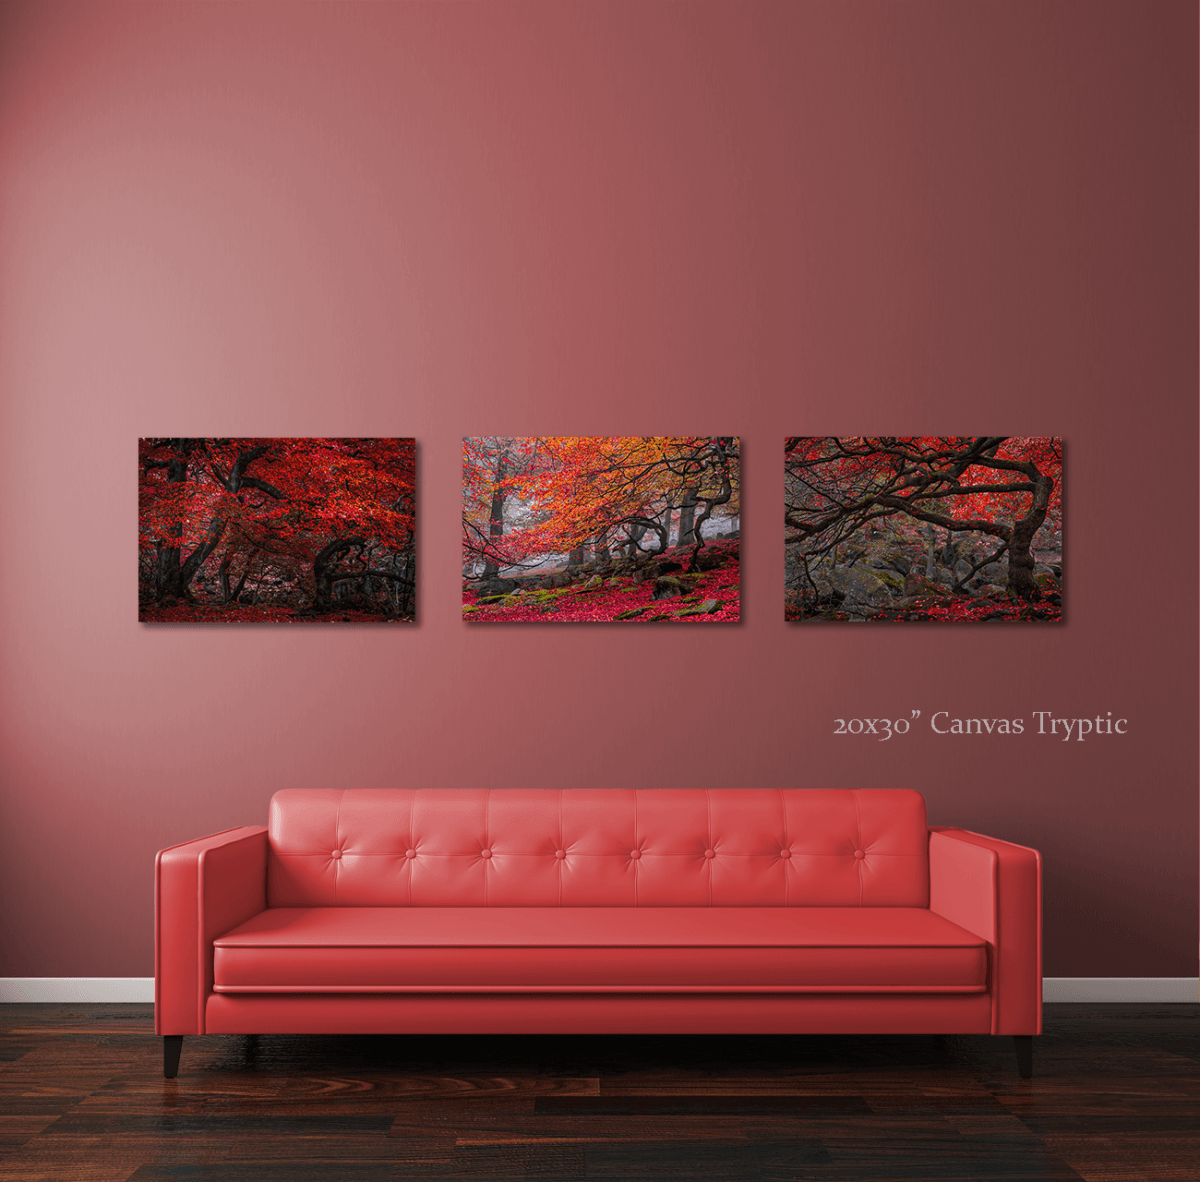 *Special Order* Deep In The Forest / Red Forest / Twisted Tree - Limited Edition 20x30 Ca... by Ben Robson Hull